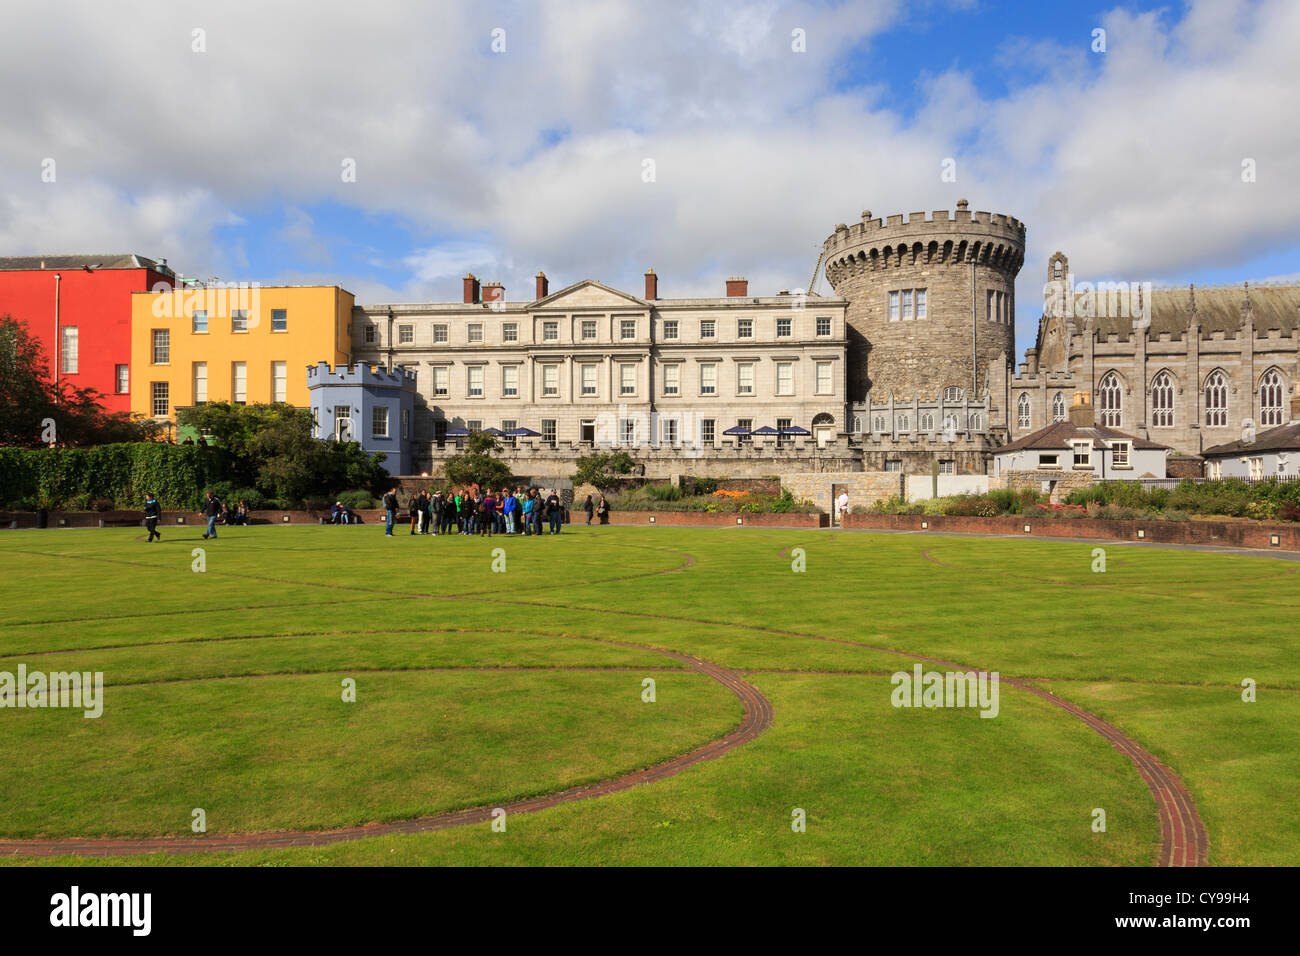 View to Record Tower and Dublin Castle gardens with a Celtic design in the lawns and tourists visiting. Dublin, Republic of Ireland, Eire Stock Photo